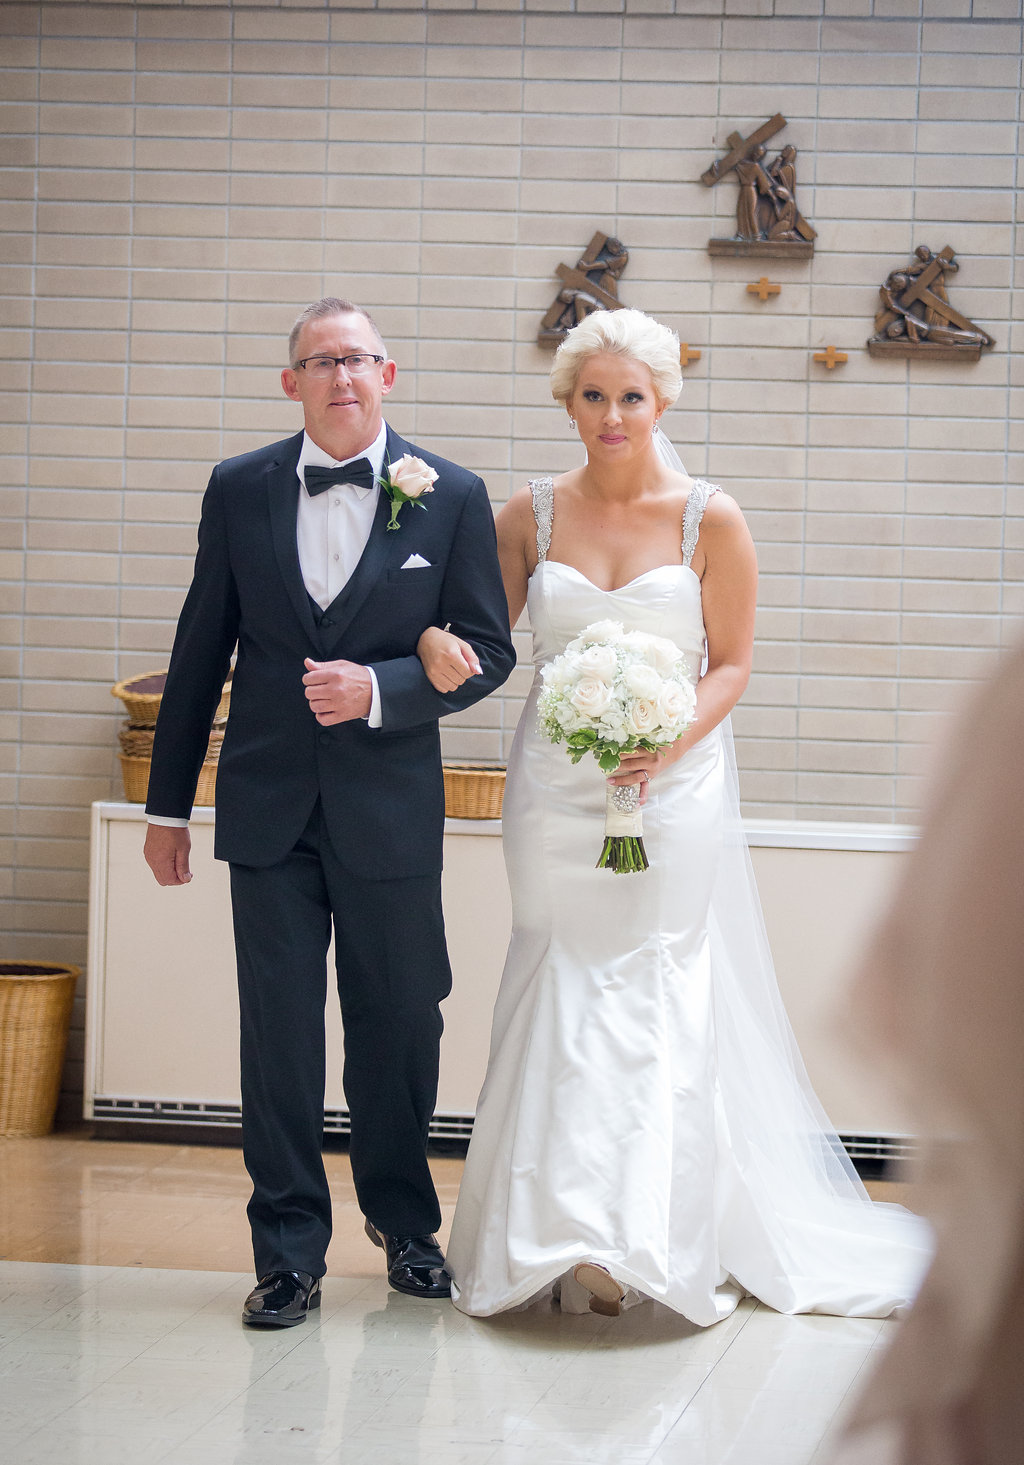 Bride walking down the aisle with Father for church wedding